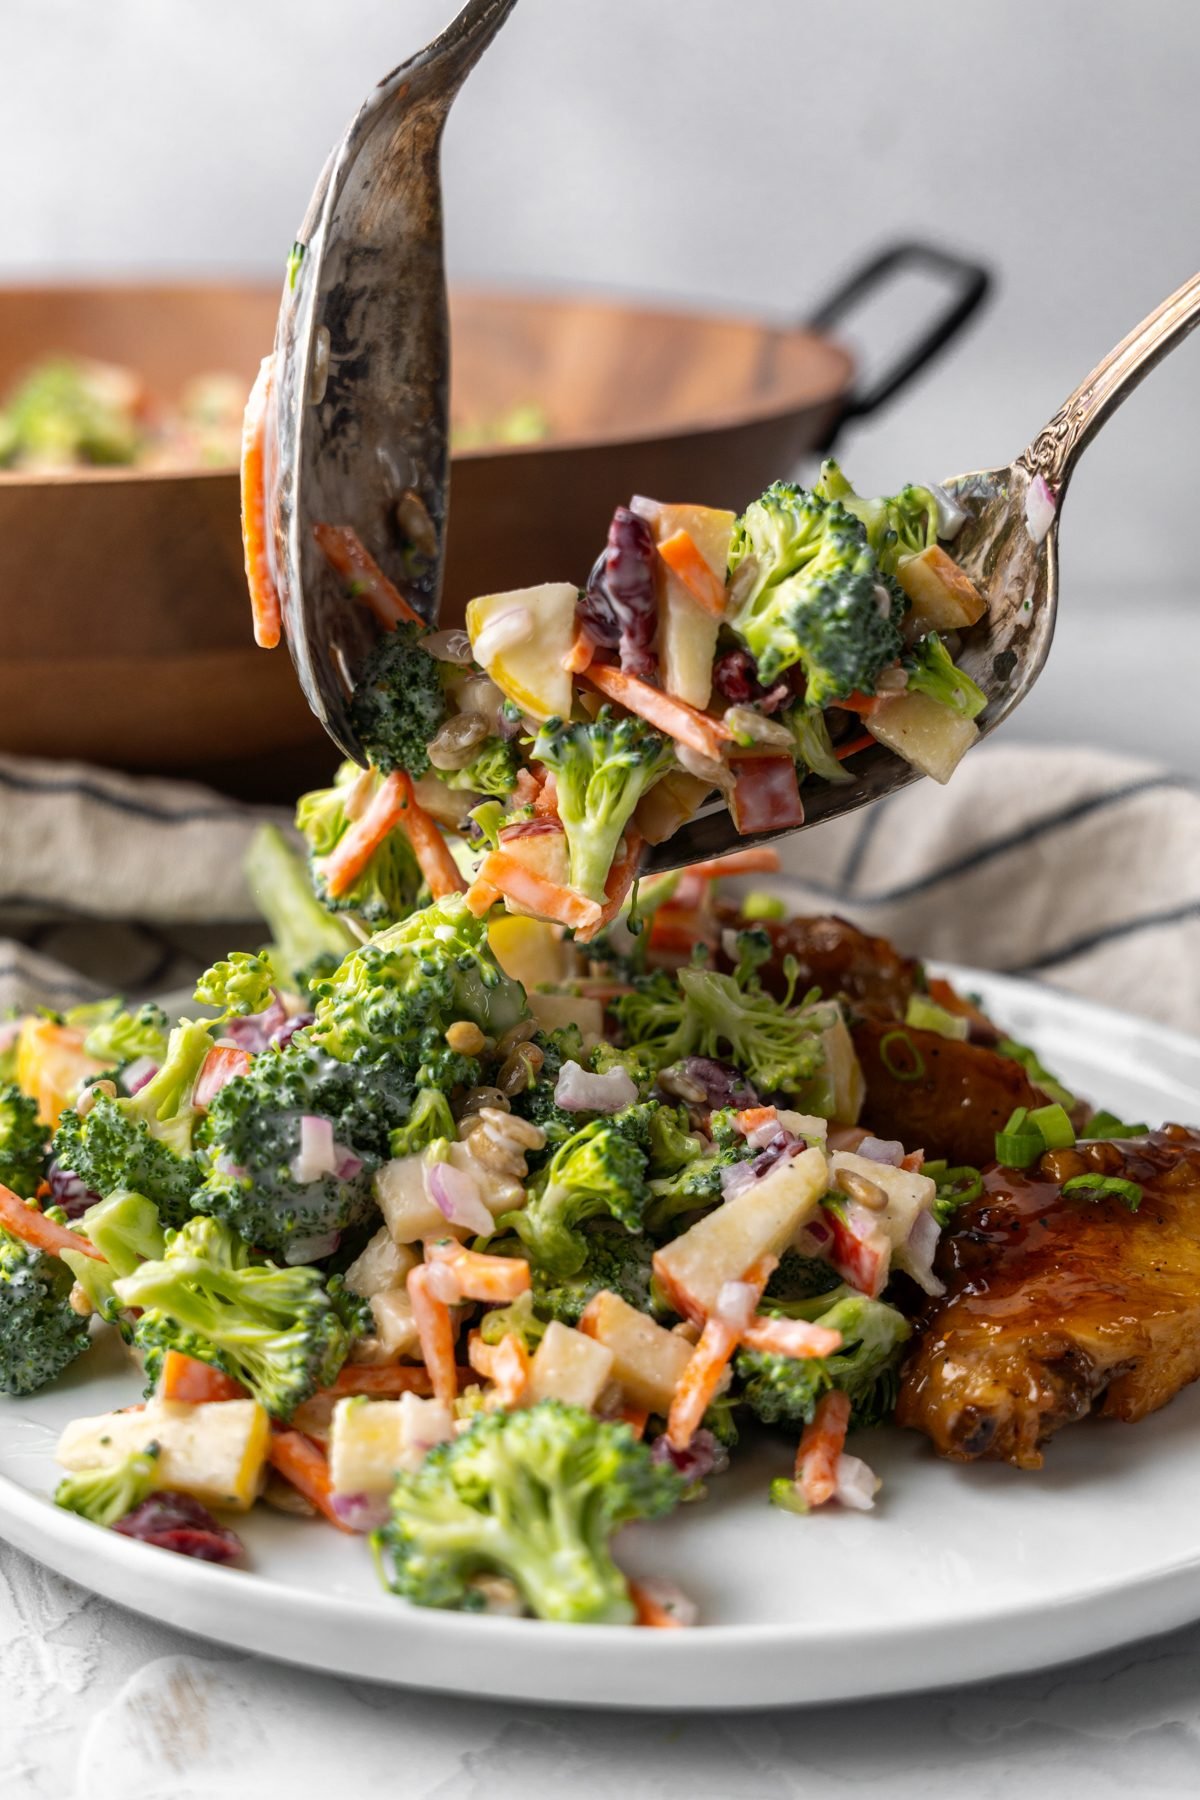 Spoons scooping broccoli crunch salad onto a plate.